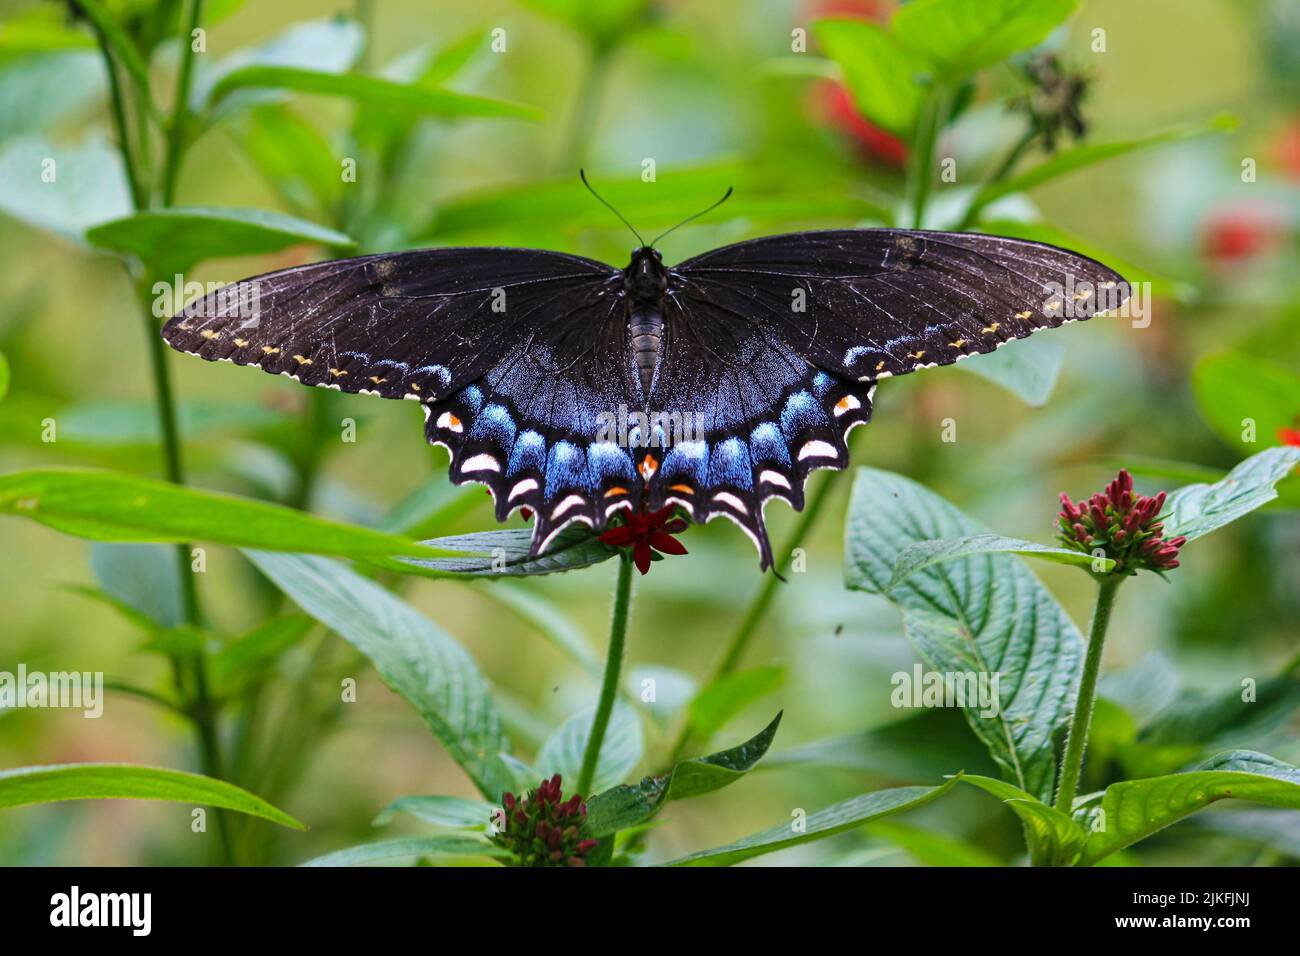 A closeup of a black tiger swallowtail butterfly on a plant Stock Photo